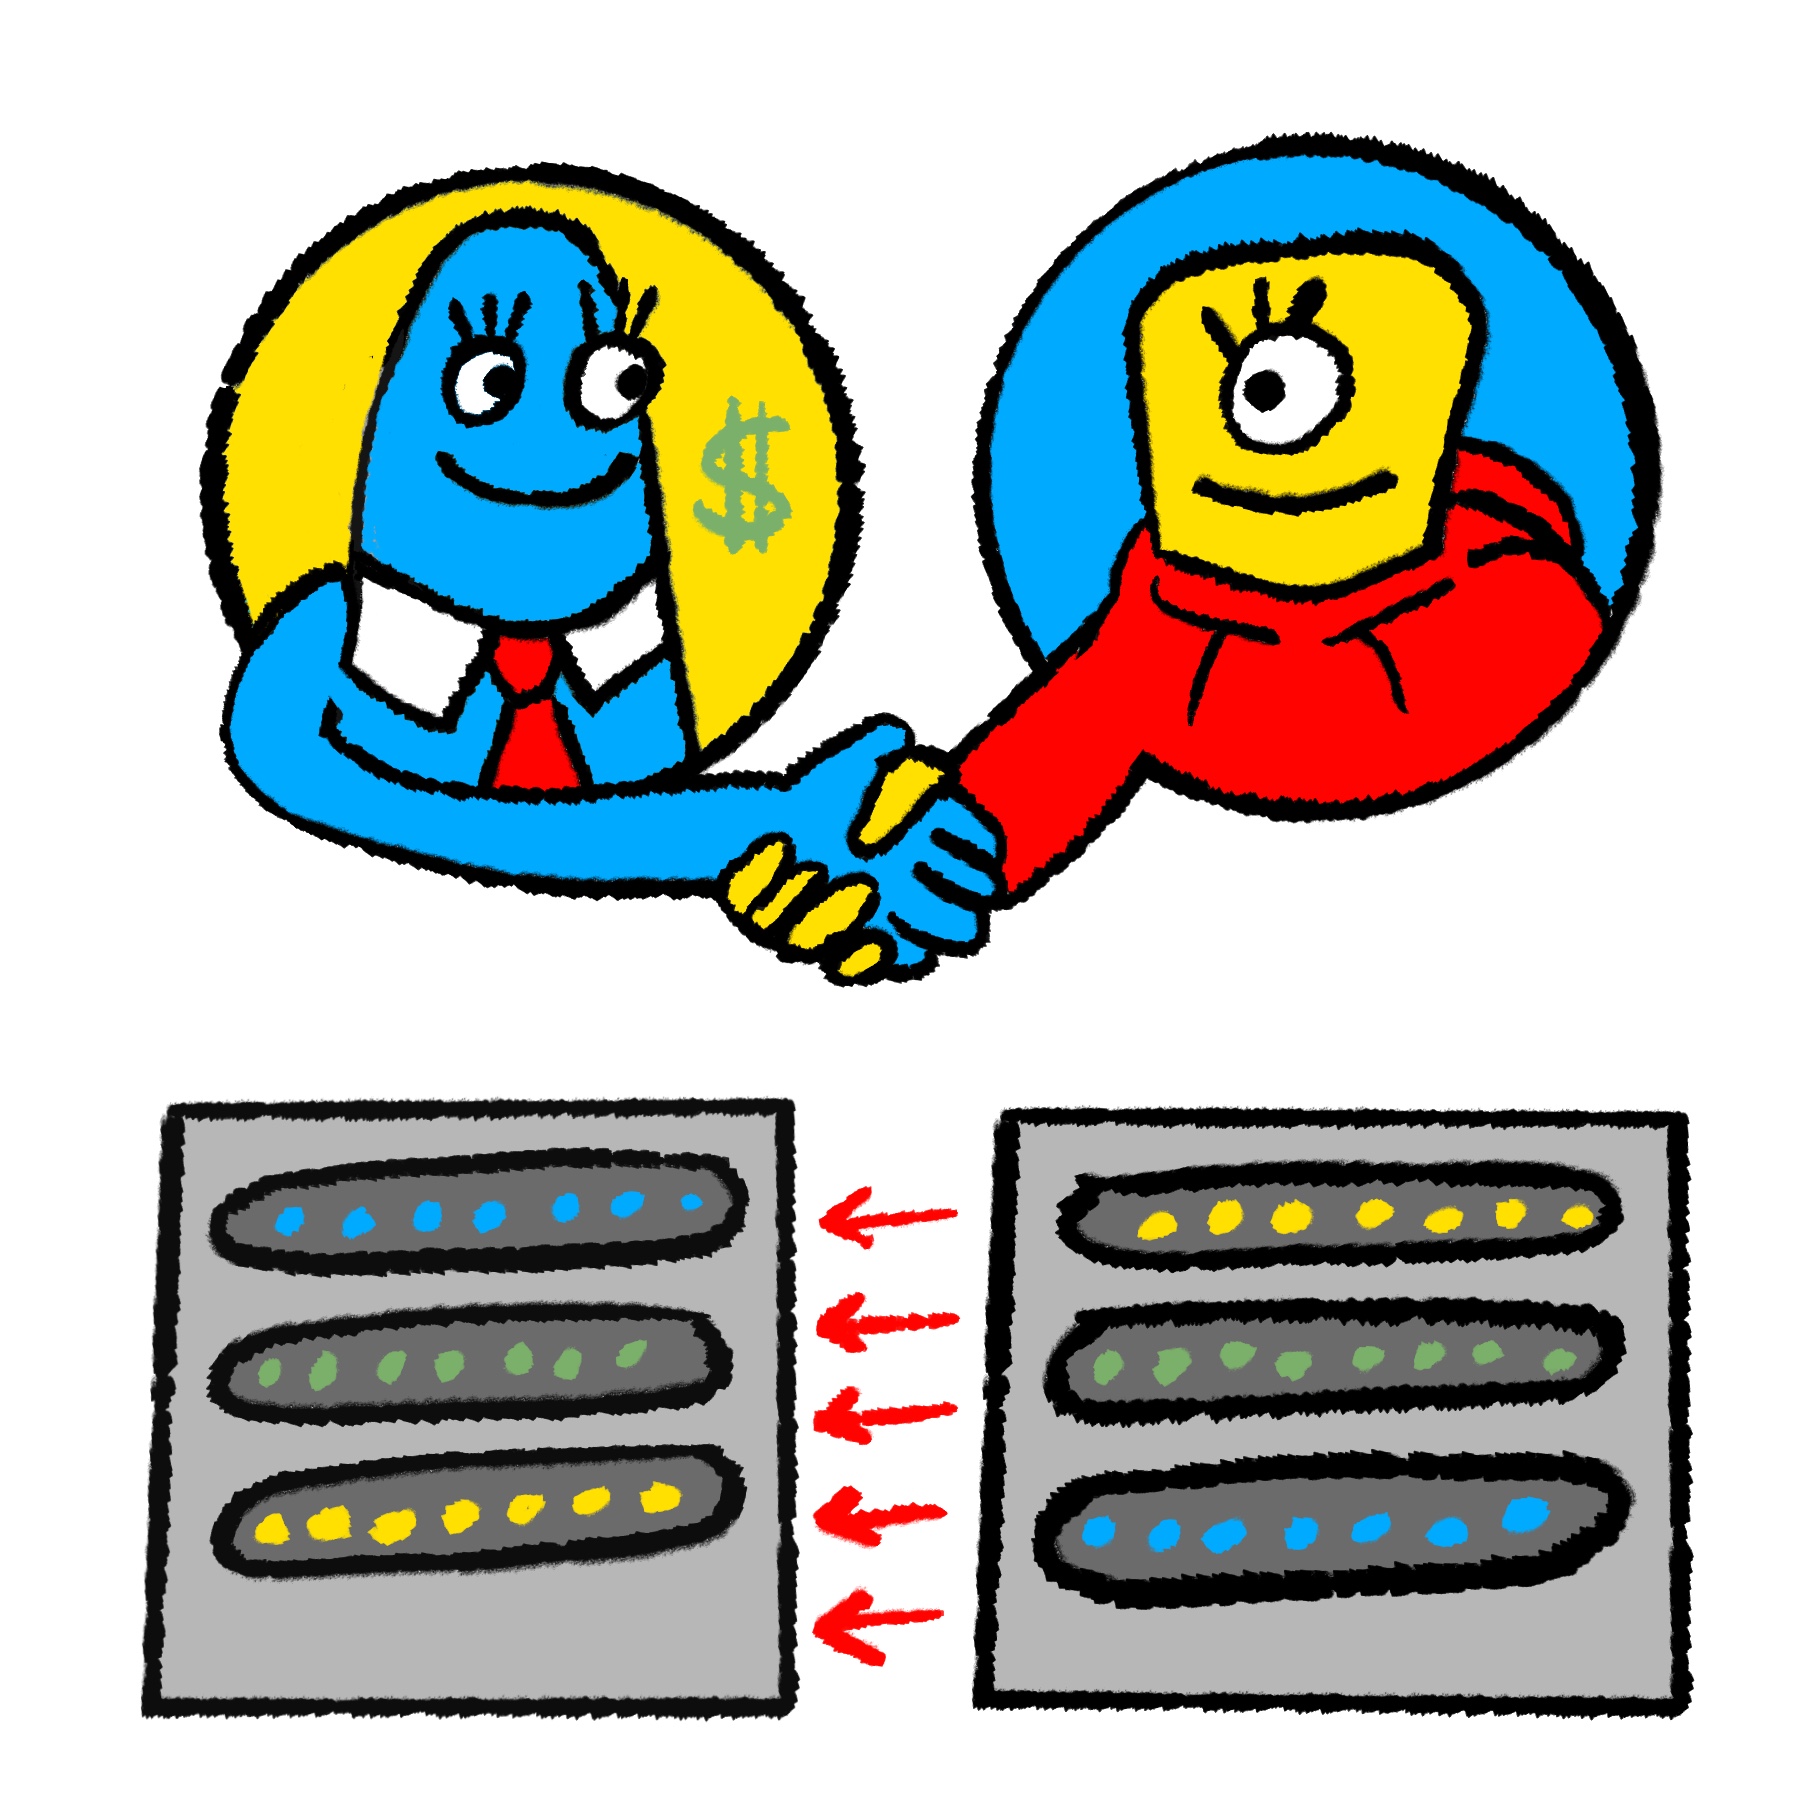 Illustration of a blue alien data broker shaking hands with a yellow alien app developer. Underneath them there are two servers transferring data.